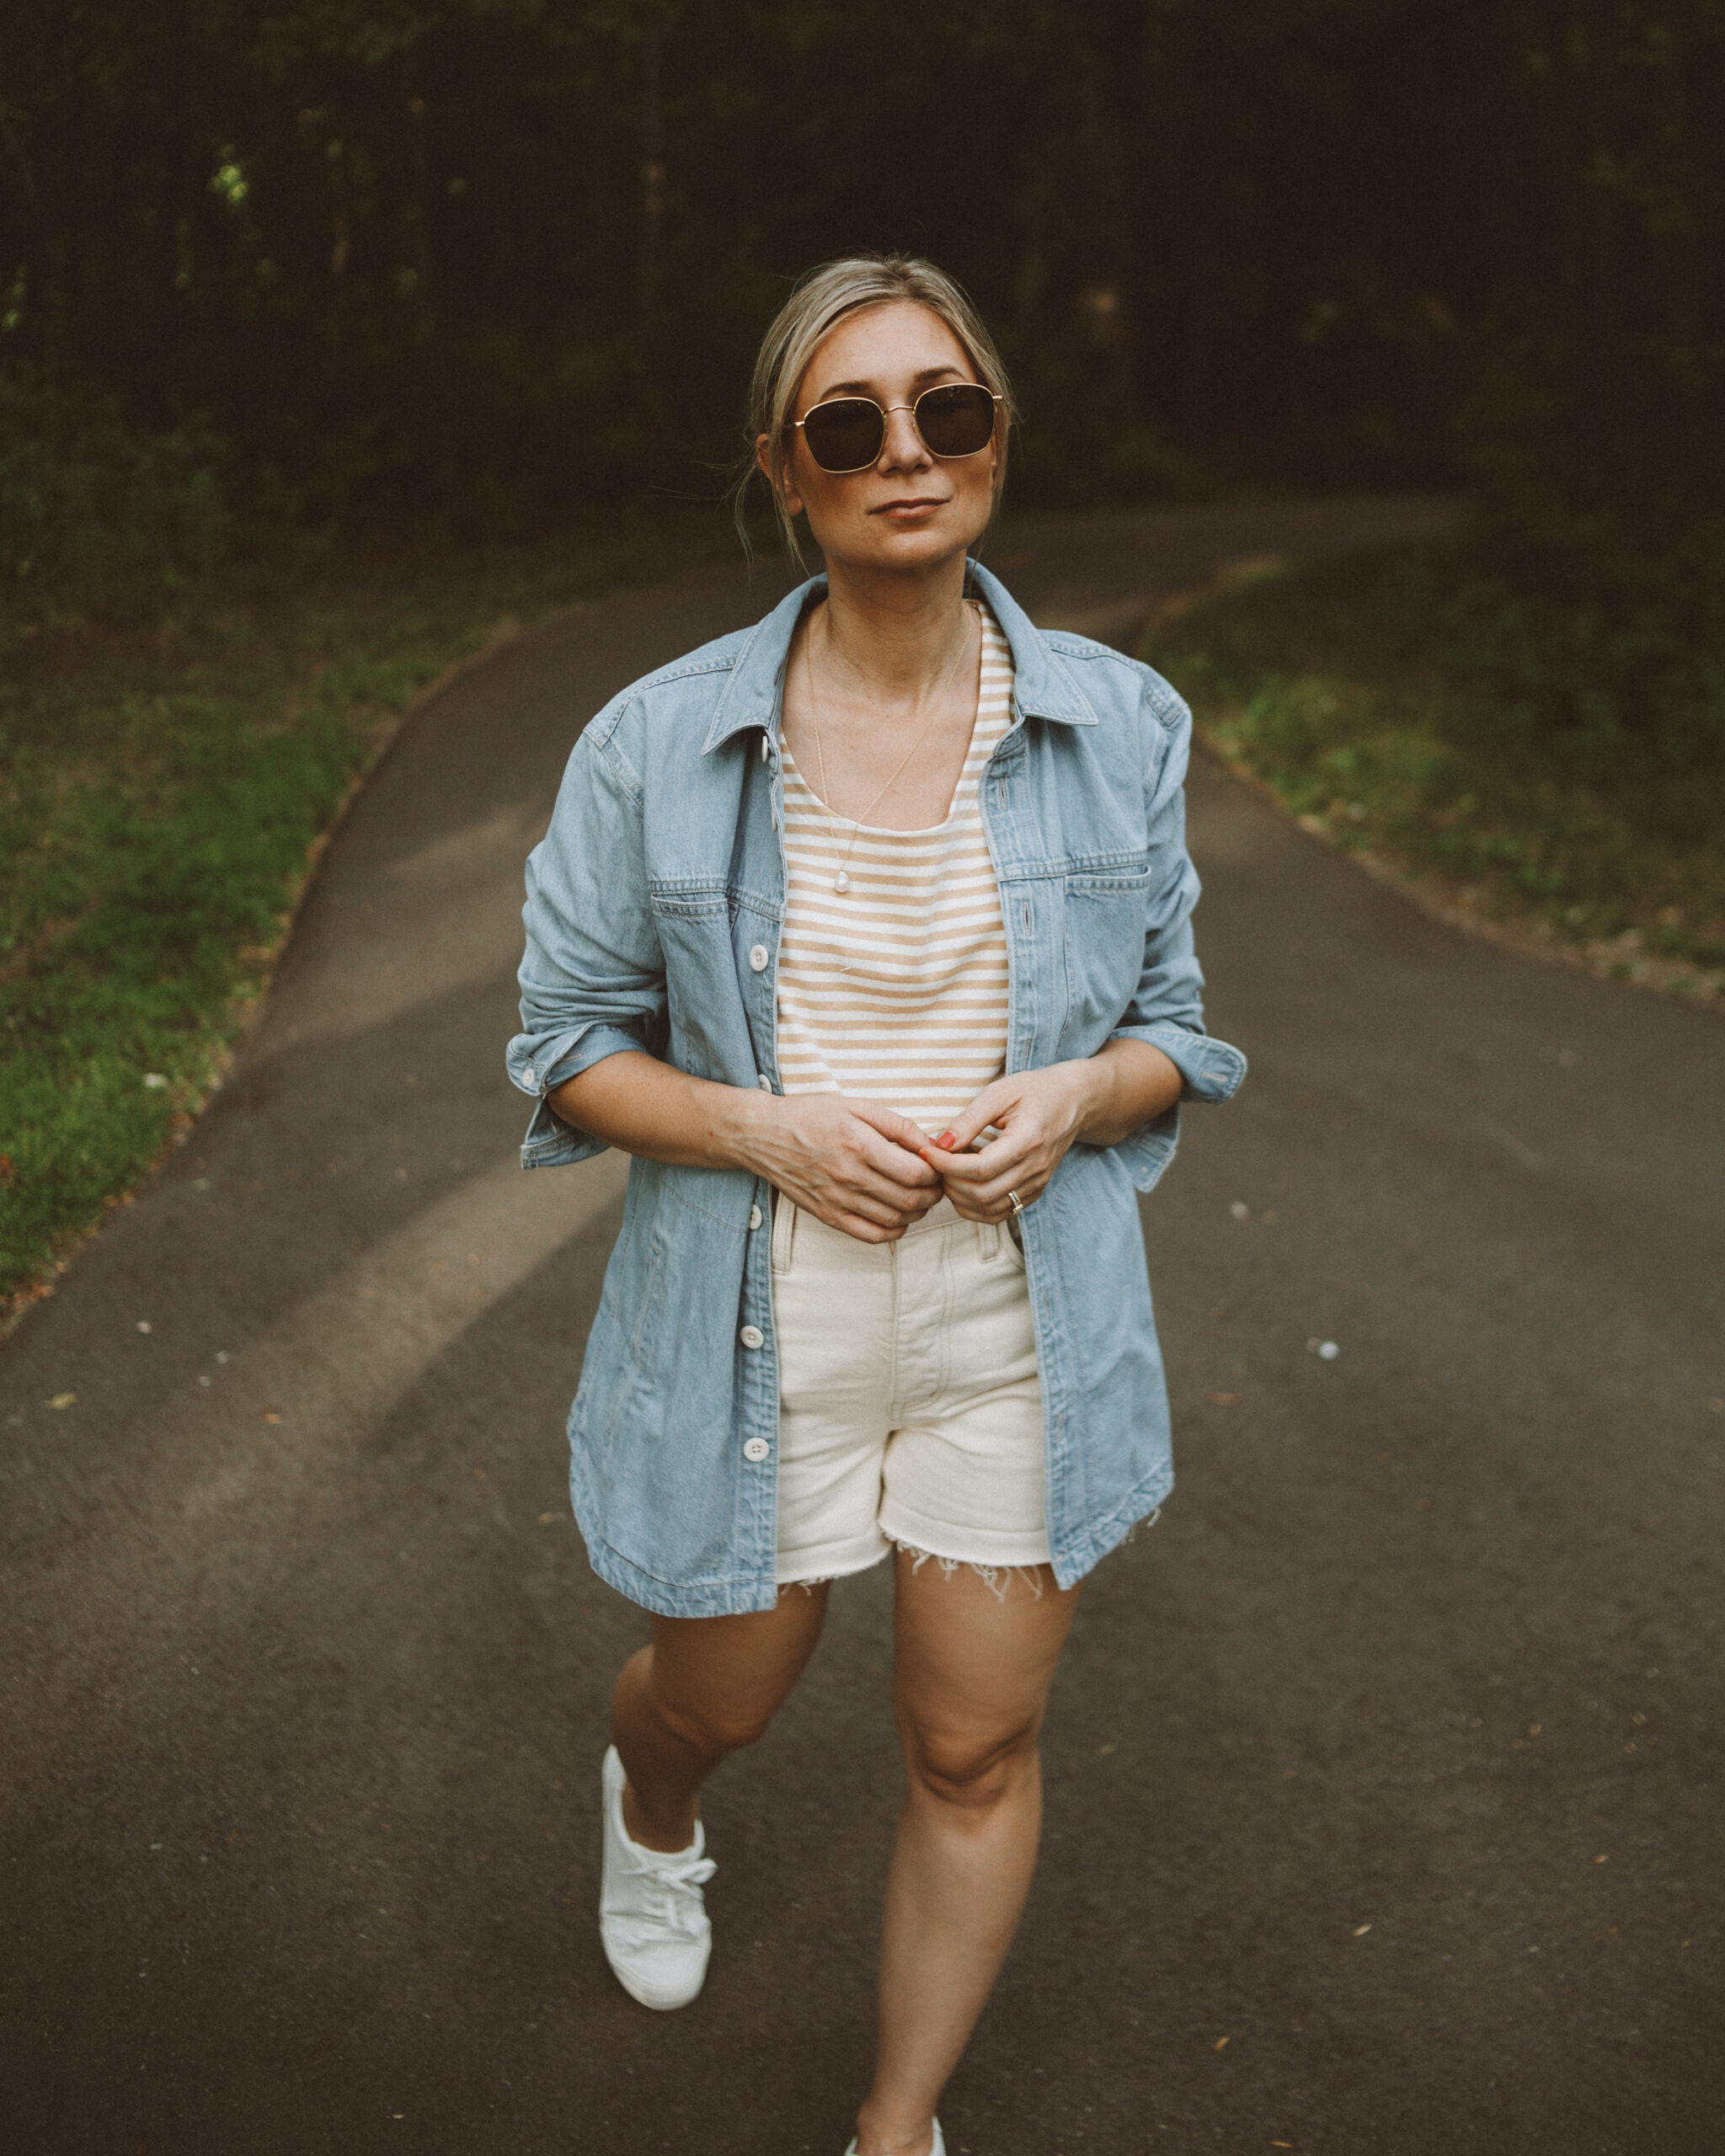 Karin Emily wears a striped tee, cream jean shorts, white sneakers and a light wash denim shirt jacket